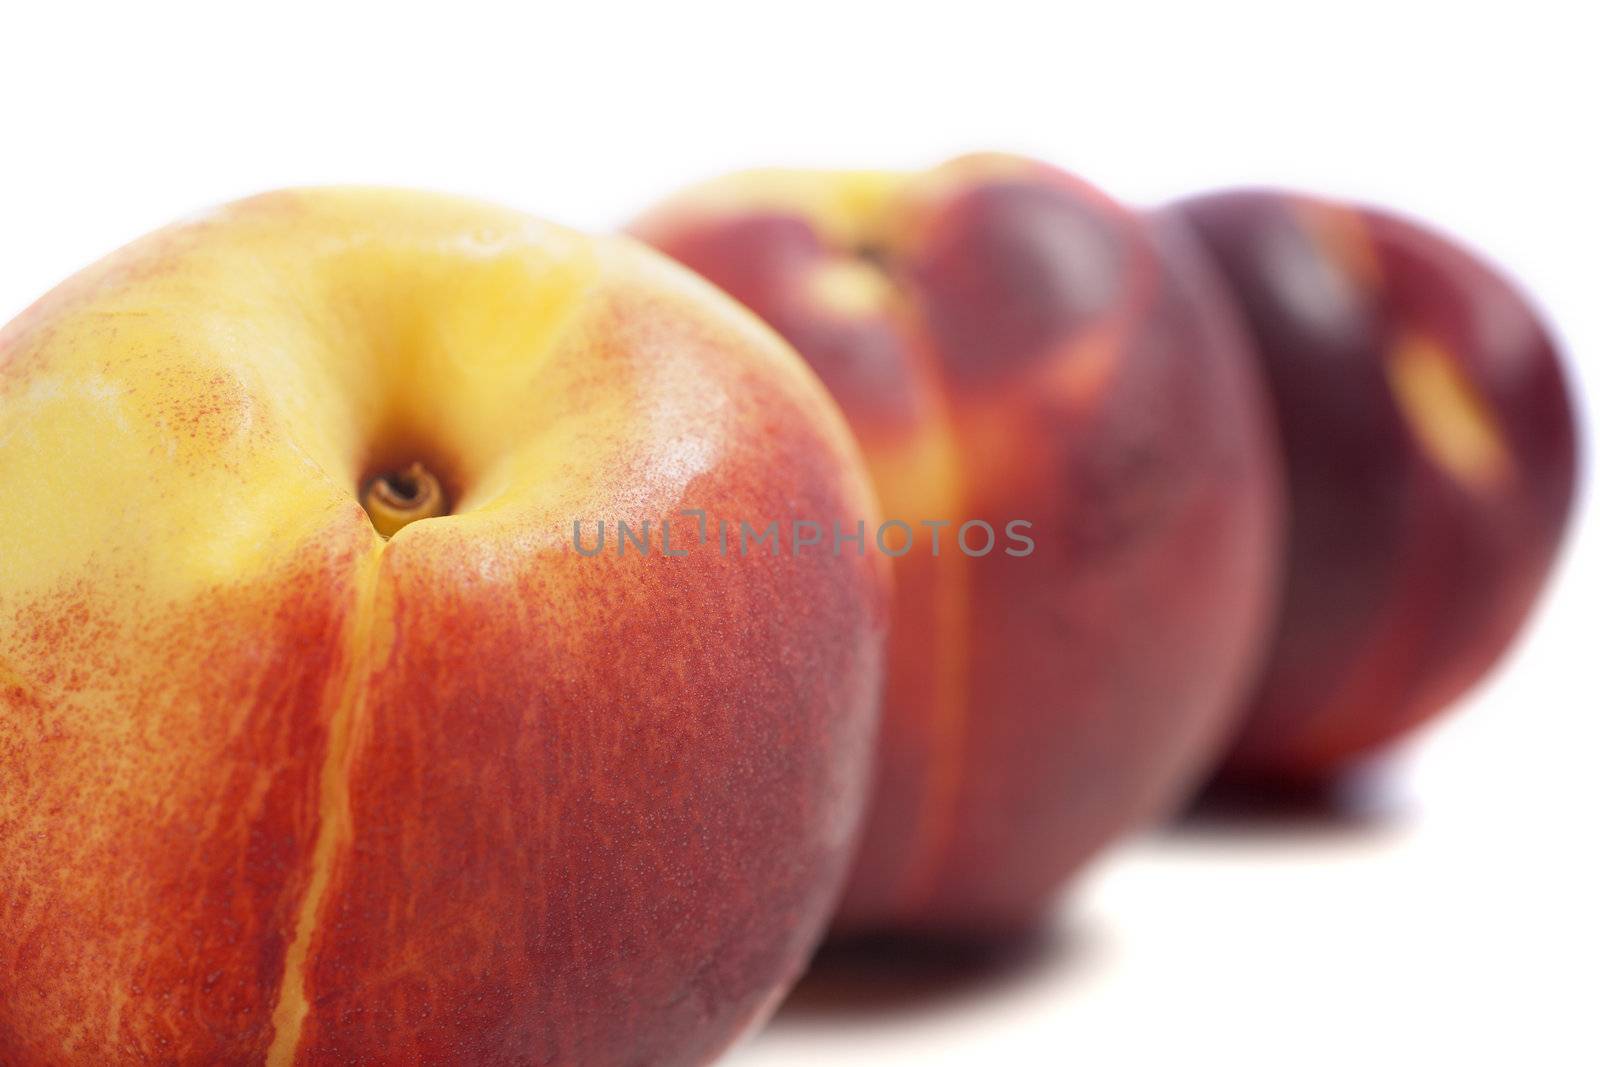 Three fresh nectarines on an isolated background